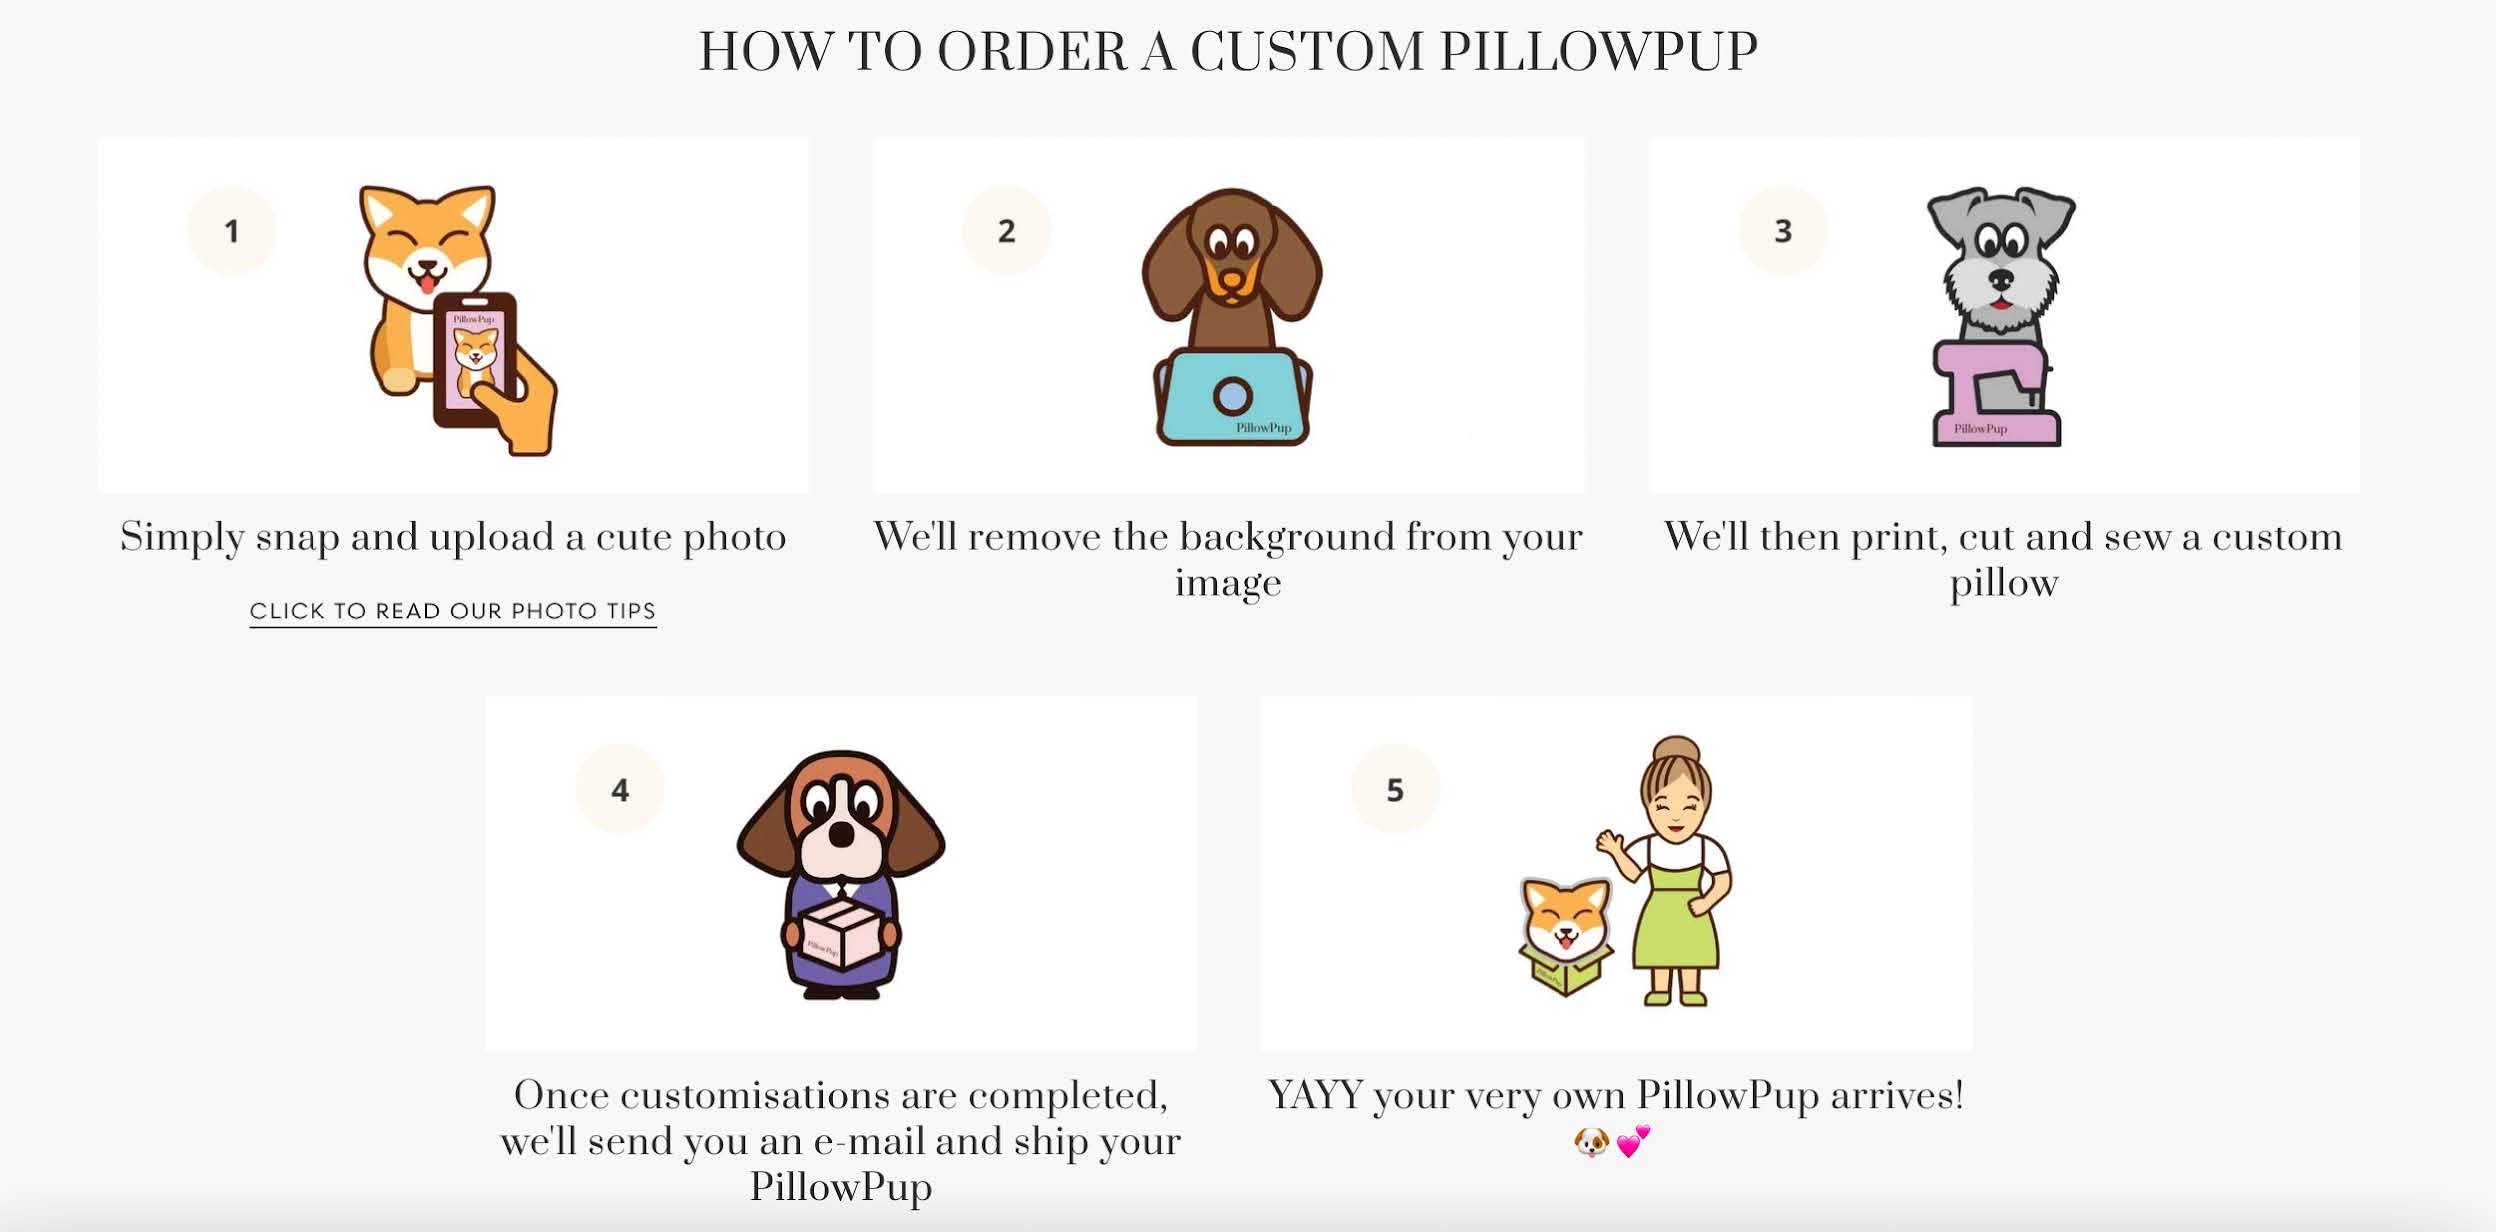 how to order custom pillowpup page